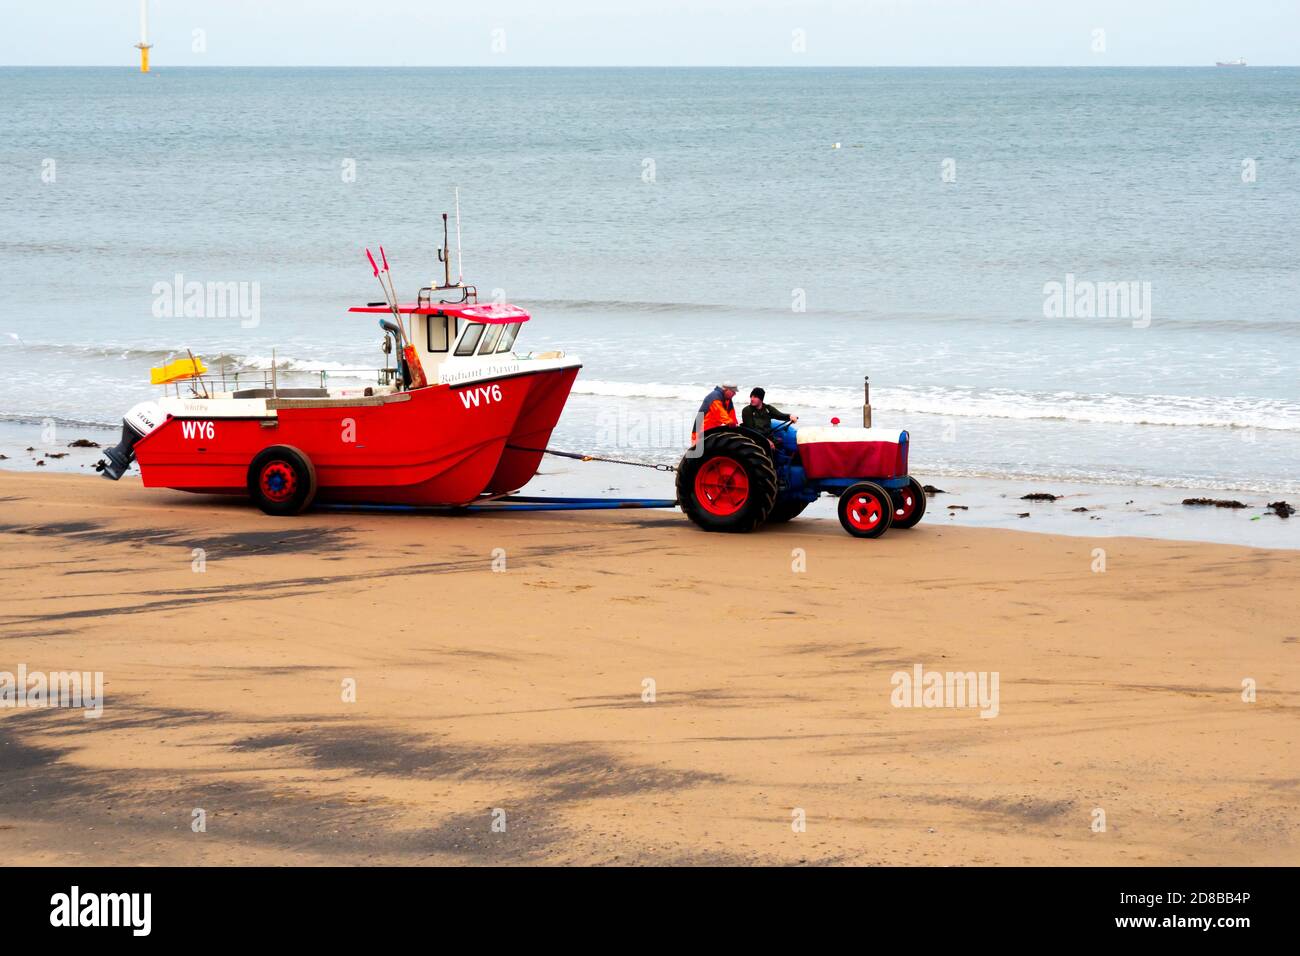 Fisherman driving a tractor hauling their red boat WY6 Radiant Dawn out of the sea Redcar Cleveland  UK Stock Photo